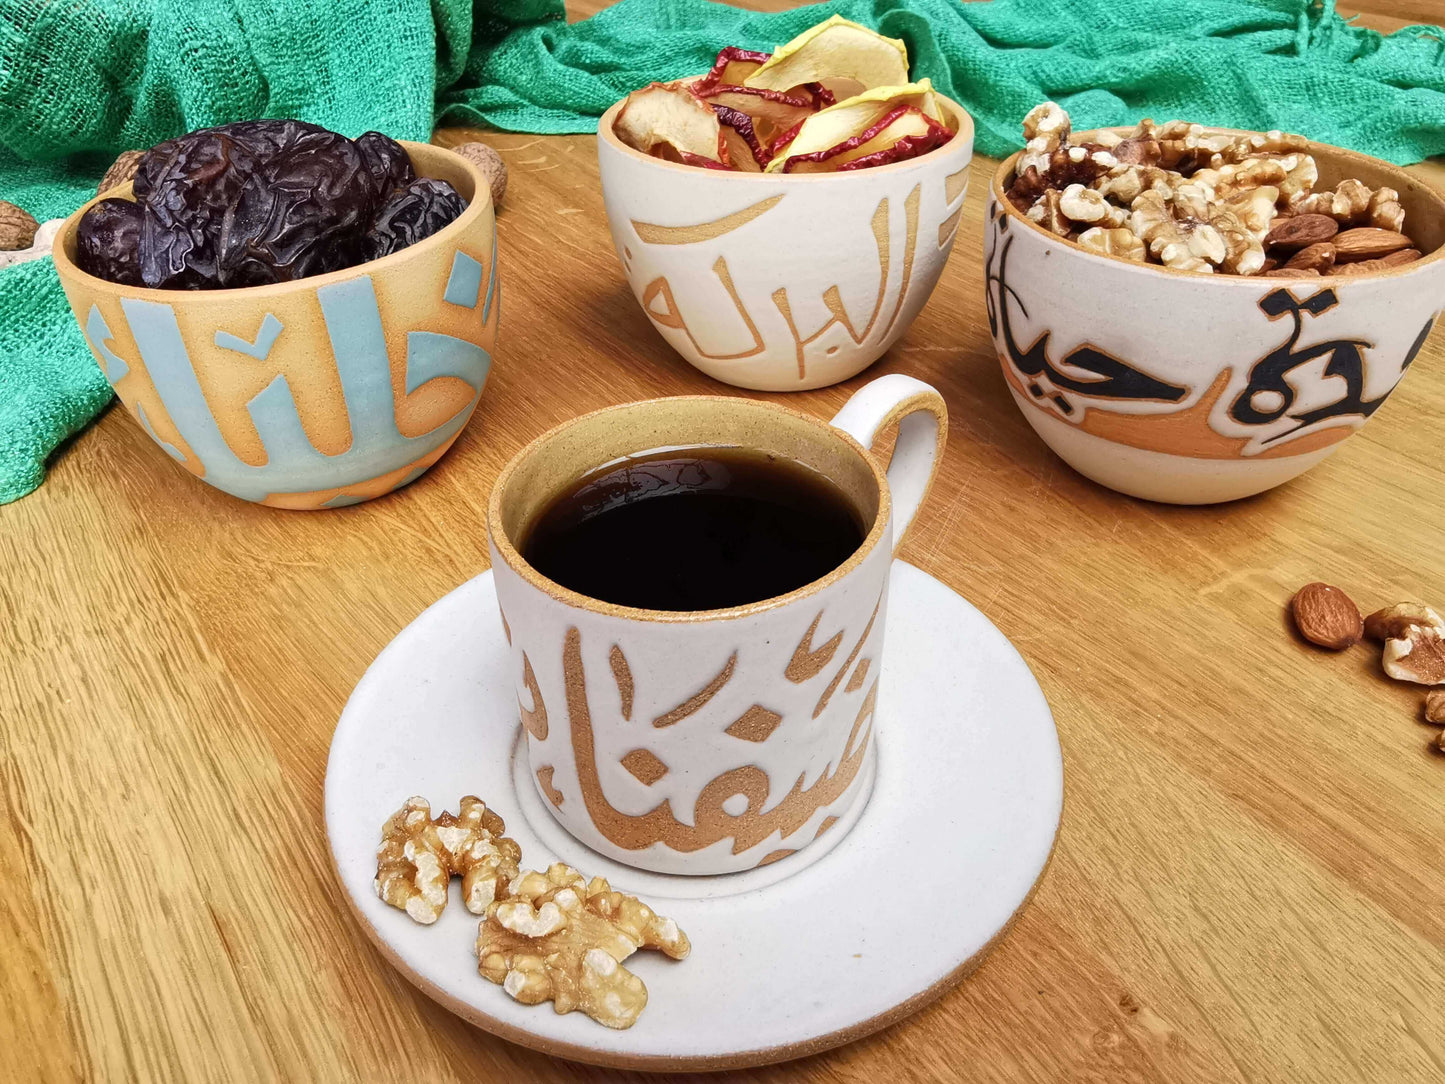 handmade pottery cup, pottery handmade, ceramic handmade pottery, Pottery dinnerware, handmade mug, Ramadan gift, mothers day gift, house warming gift, pottery cup medium, Arabic calligraphy art, handwritten calligraphy, handwritten Arabic calligraphy